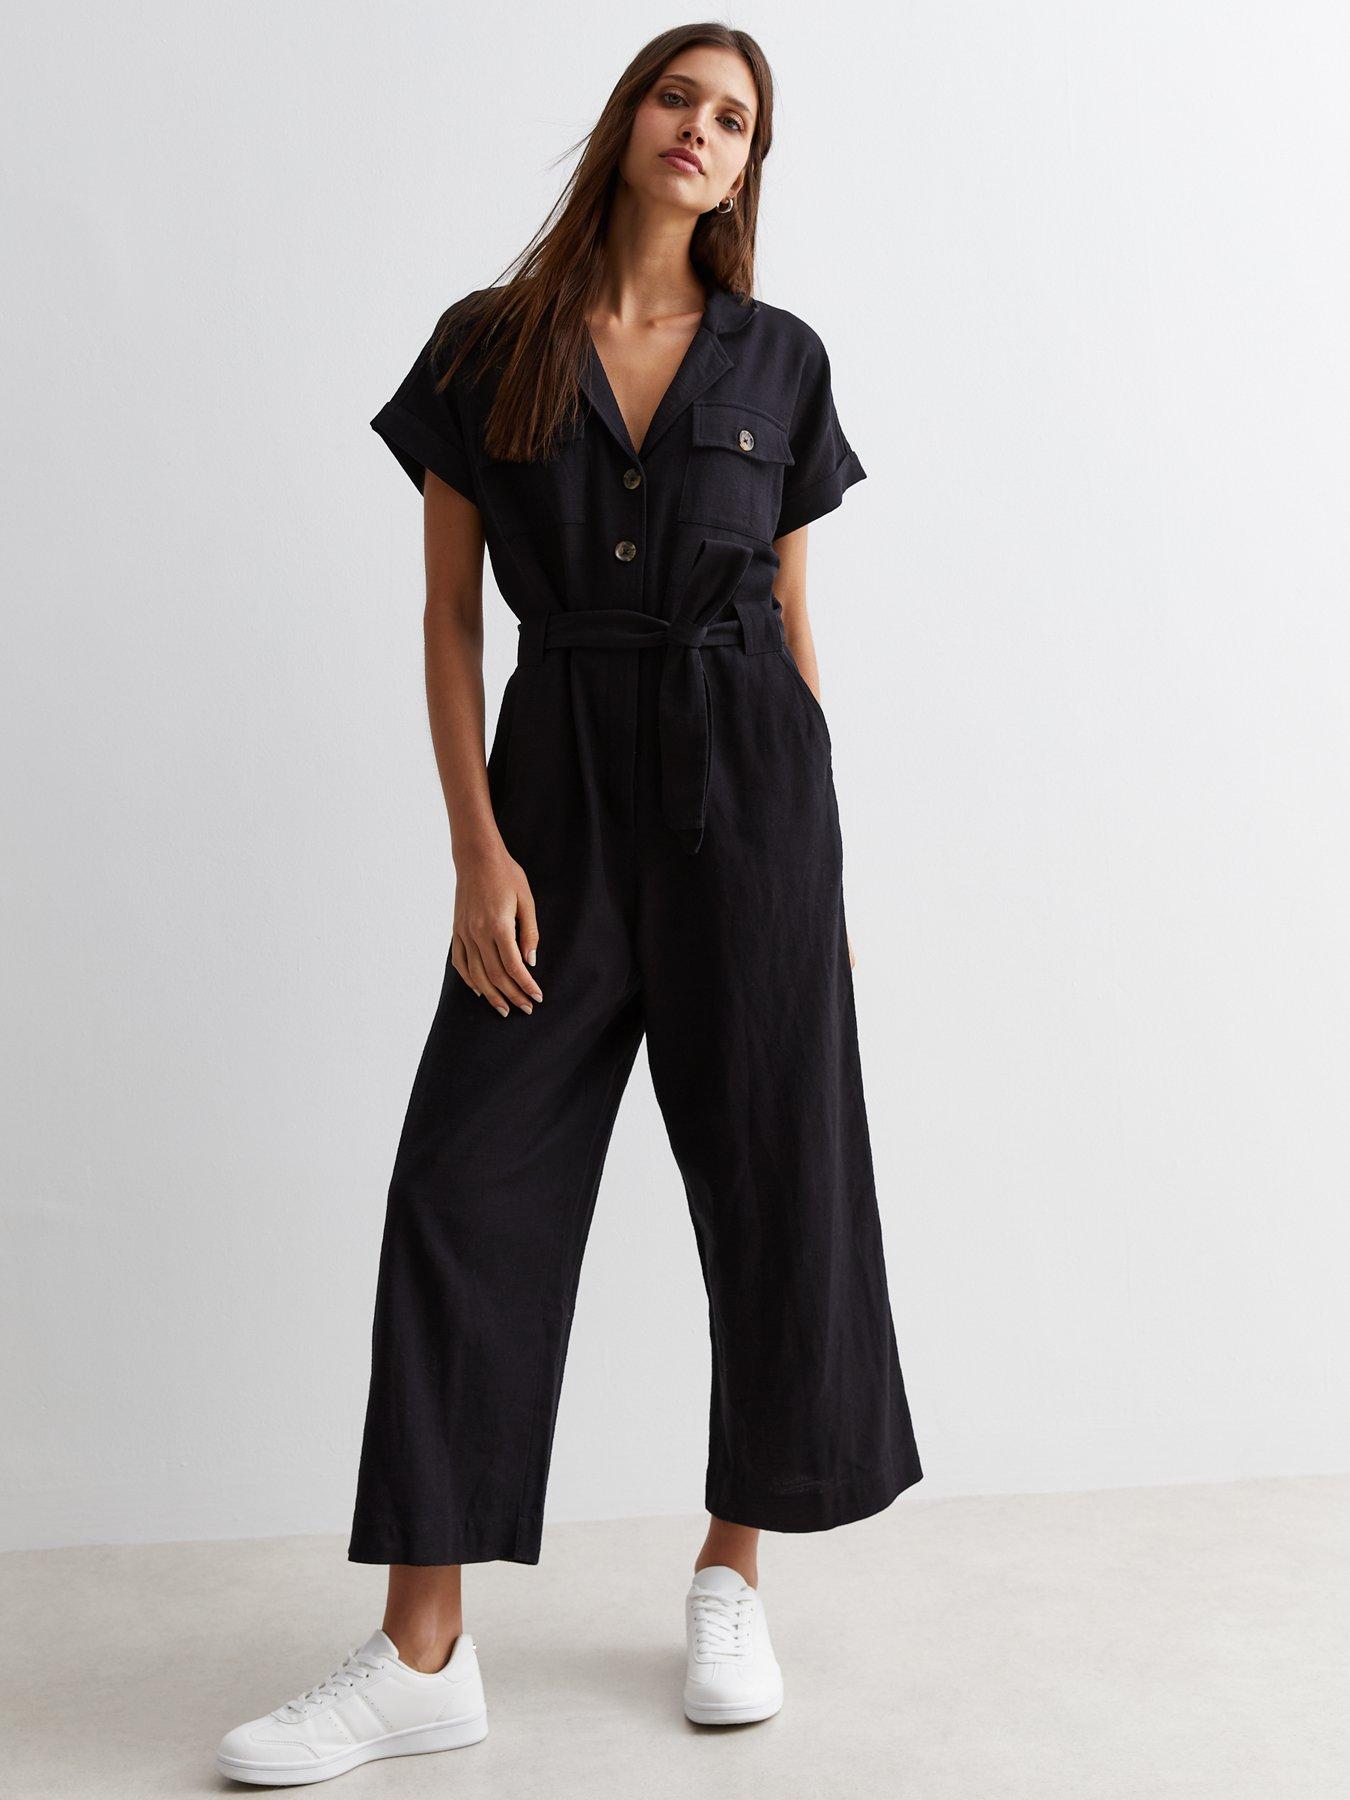 10 Stylish Designs of Denim Jumpsuits for Women and Men